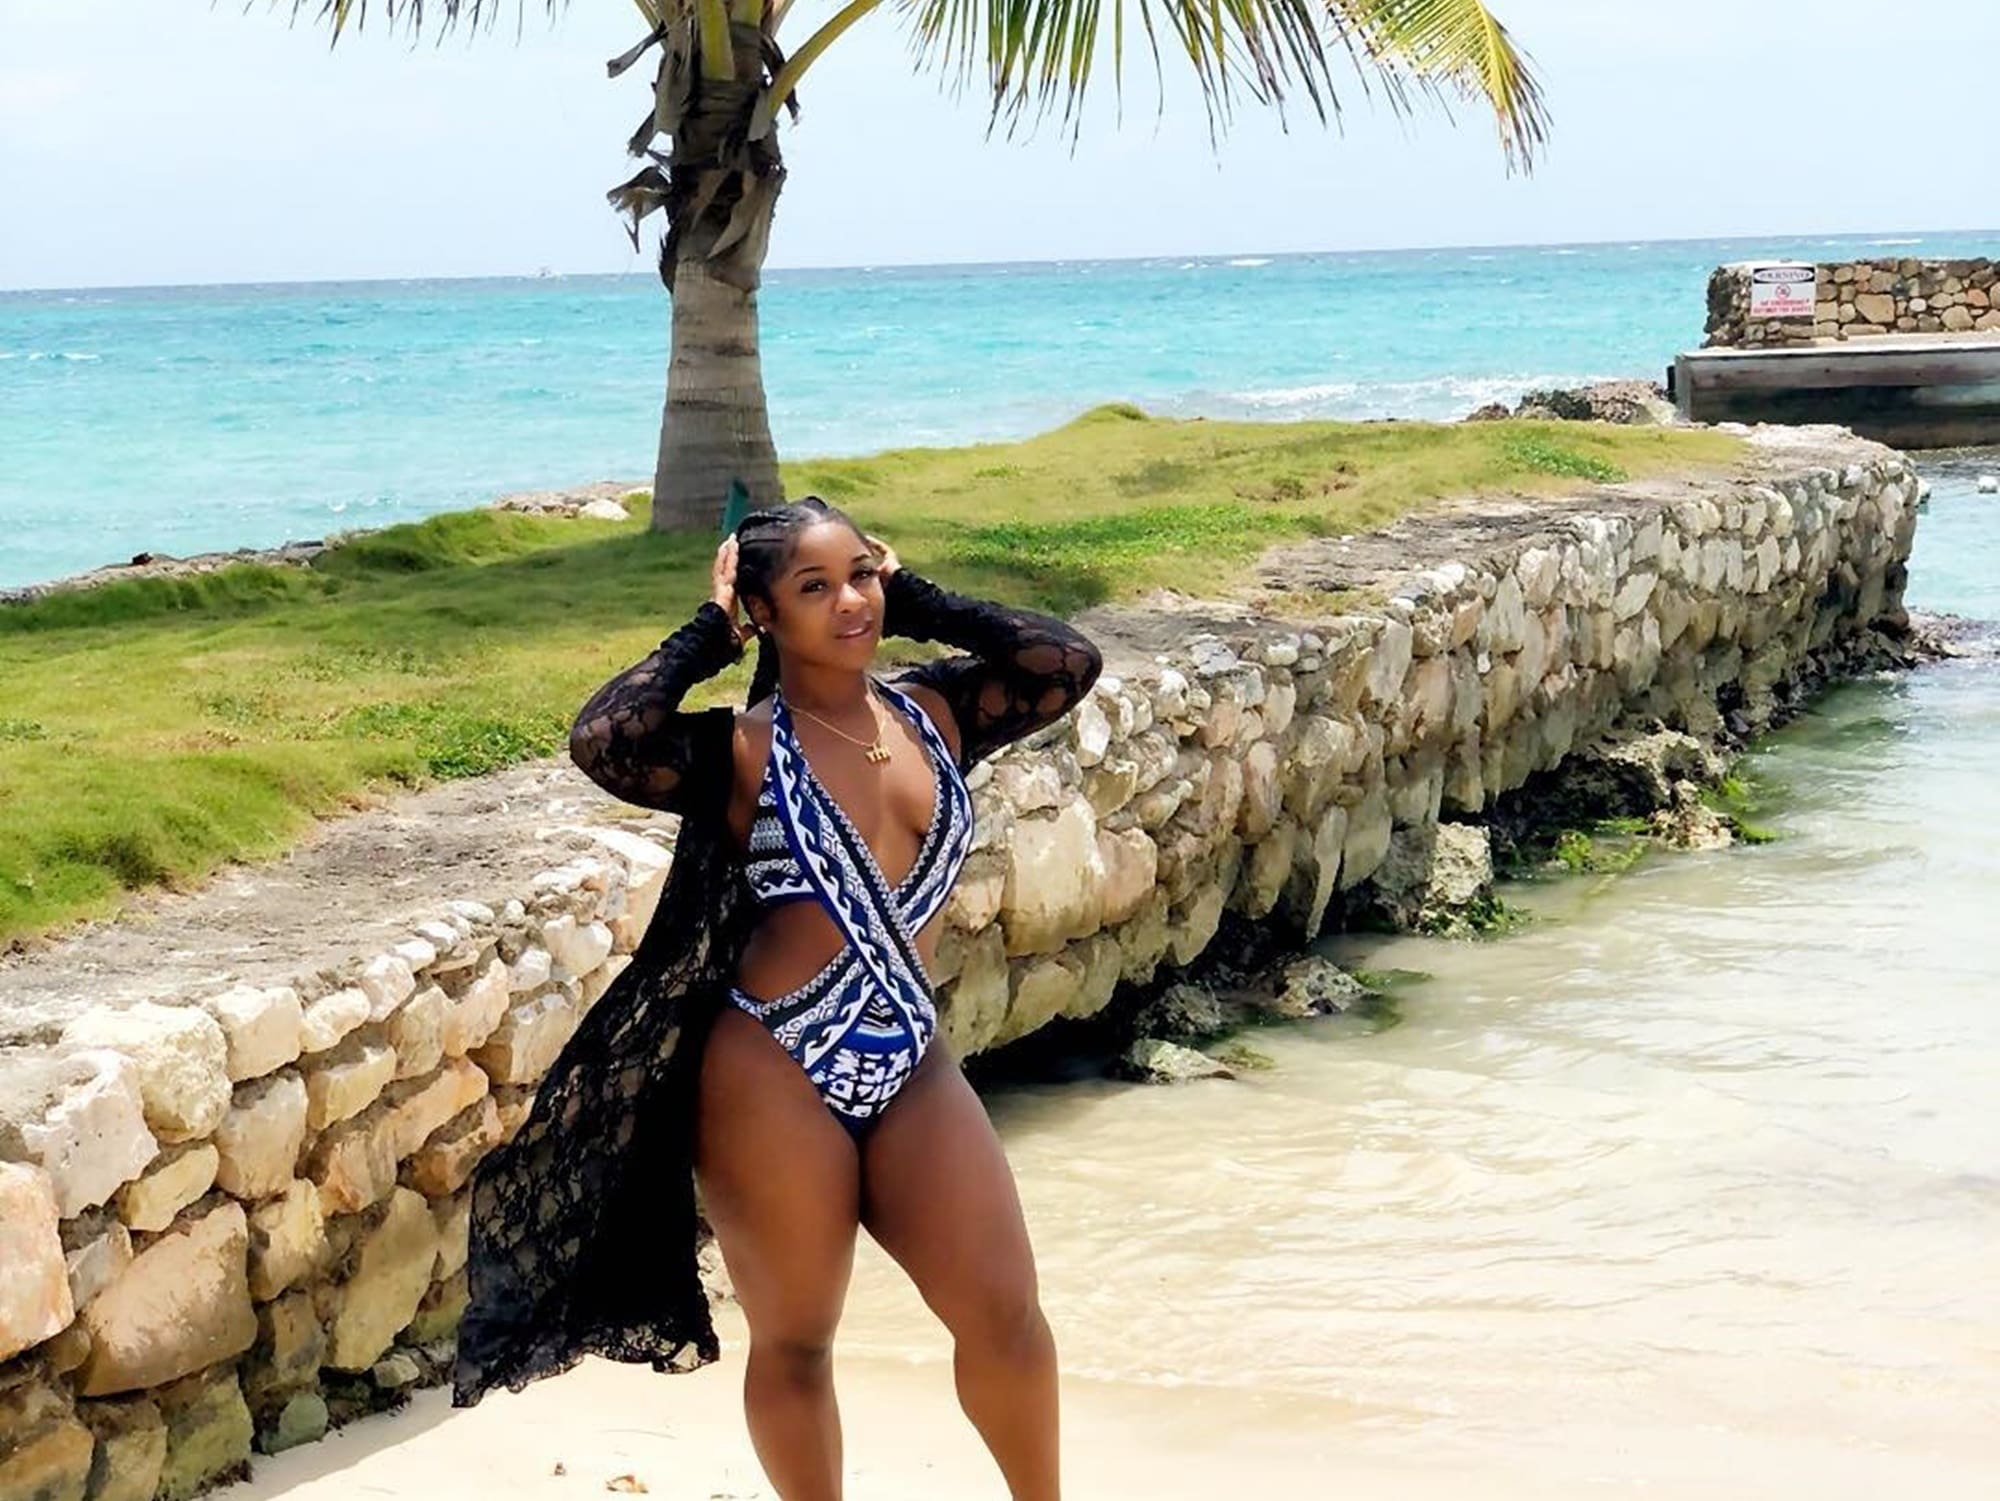 Reginae Carter Is Killing The Pool Vibe And Shows Off Her Hourglass Figure After Starting A 14-Day No Sugar Challenge With Her Mom